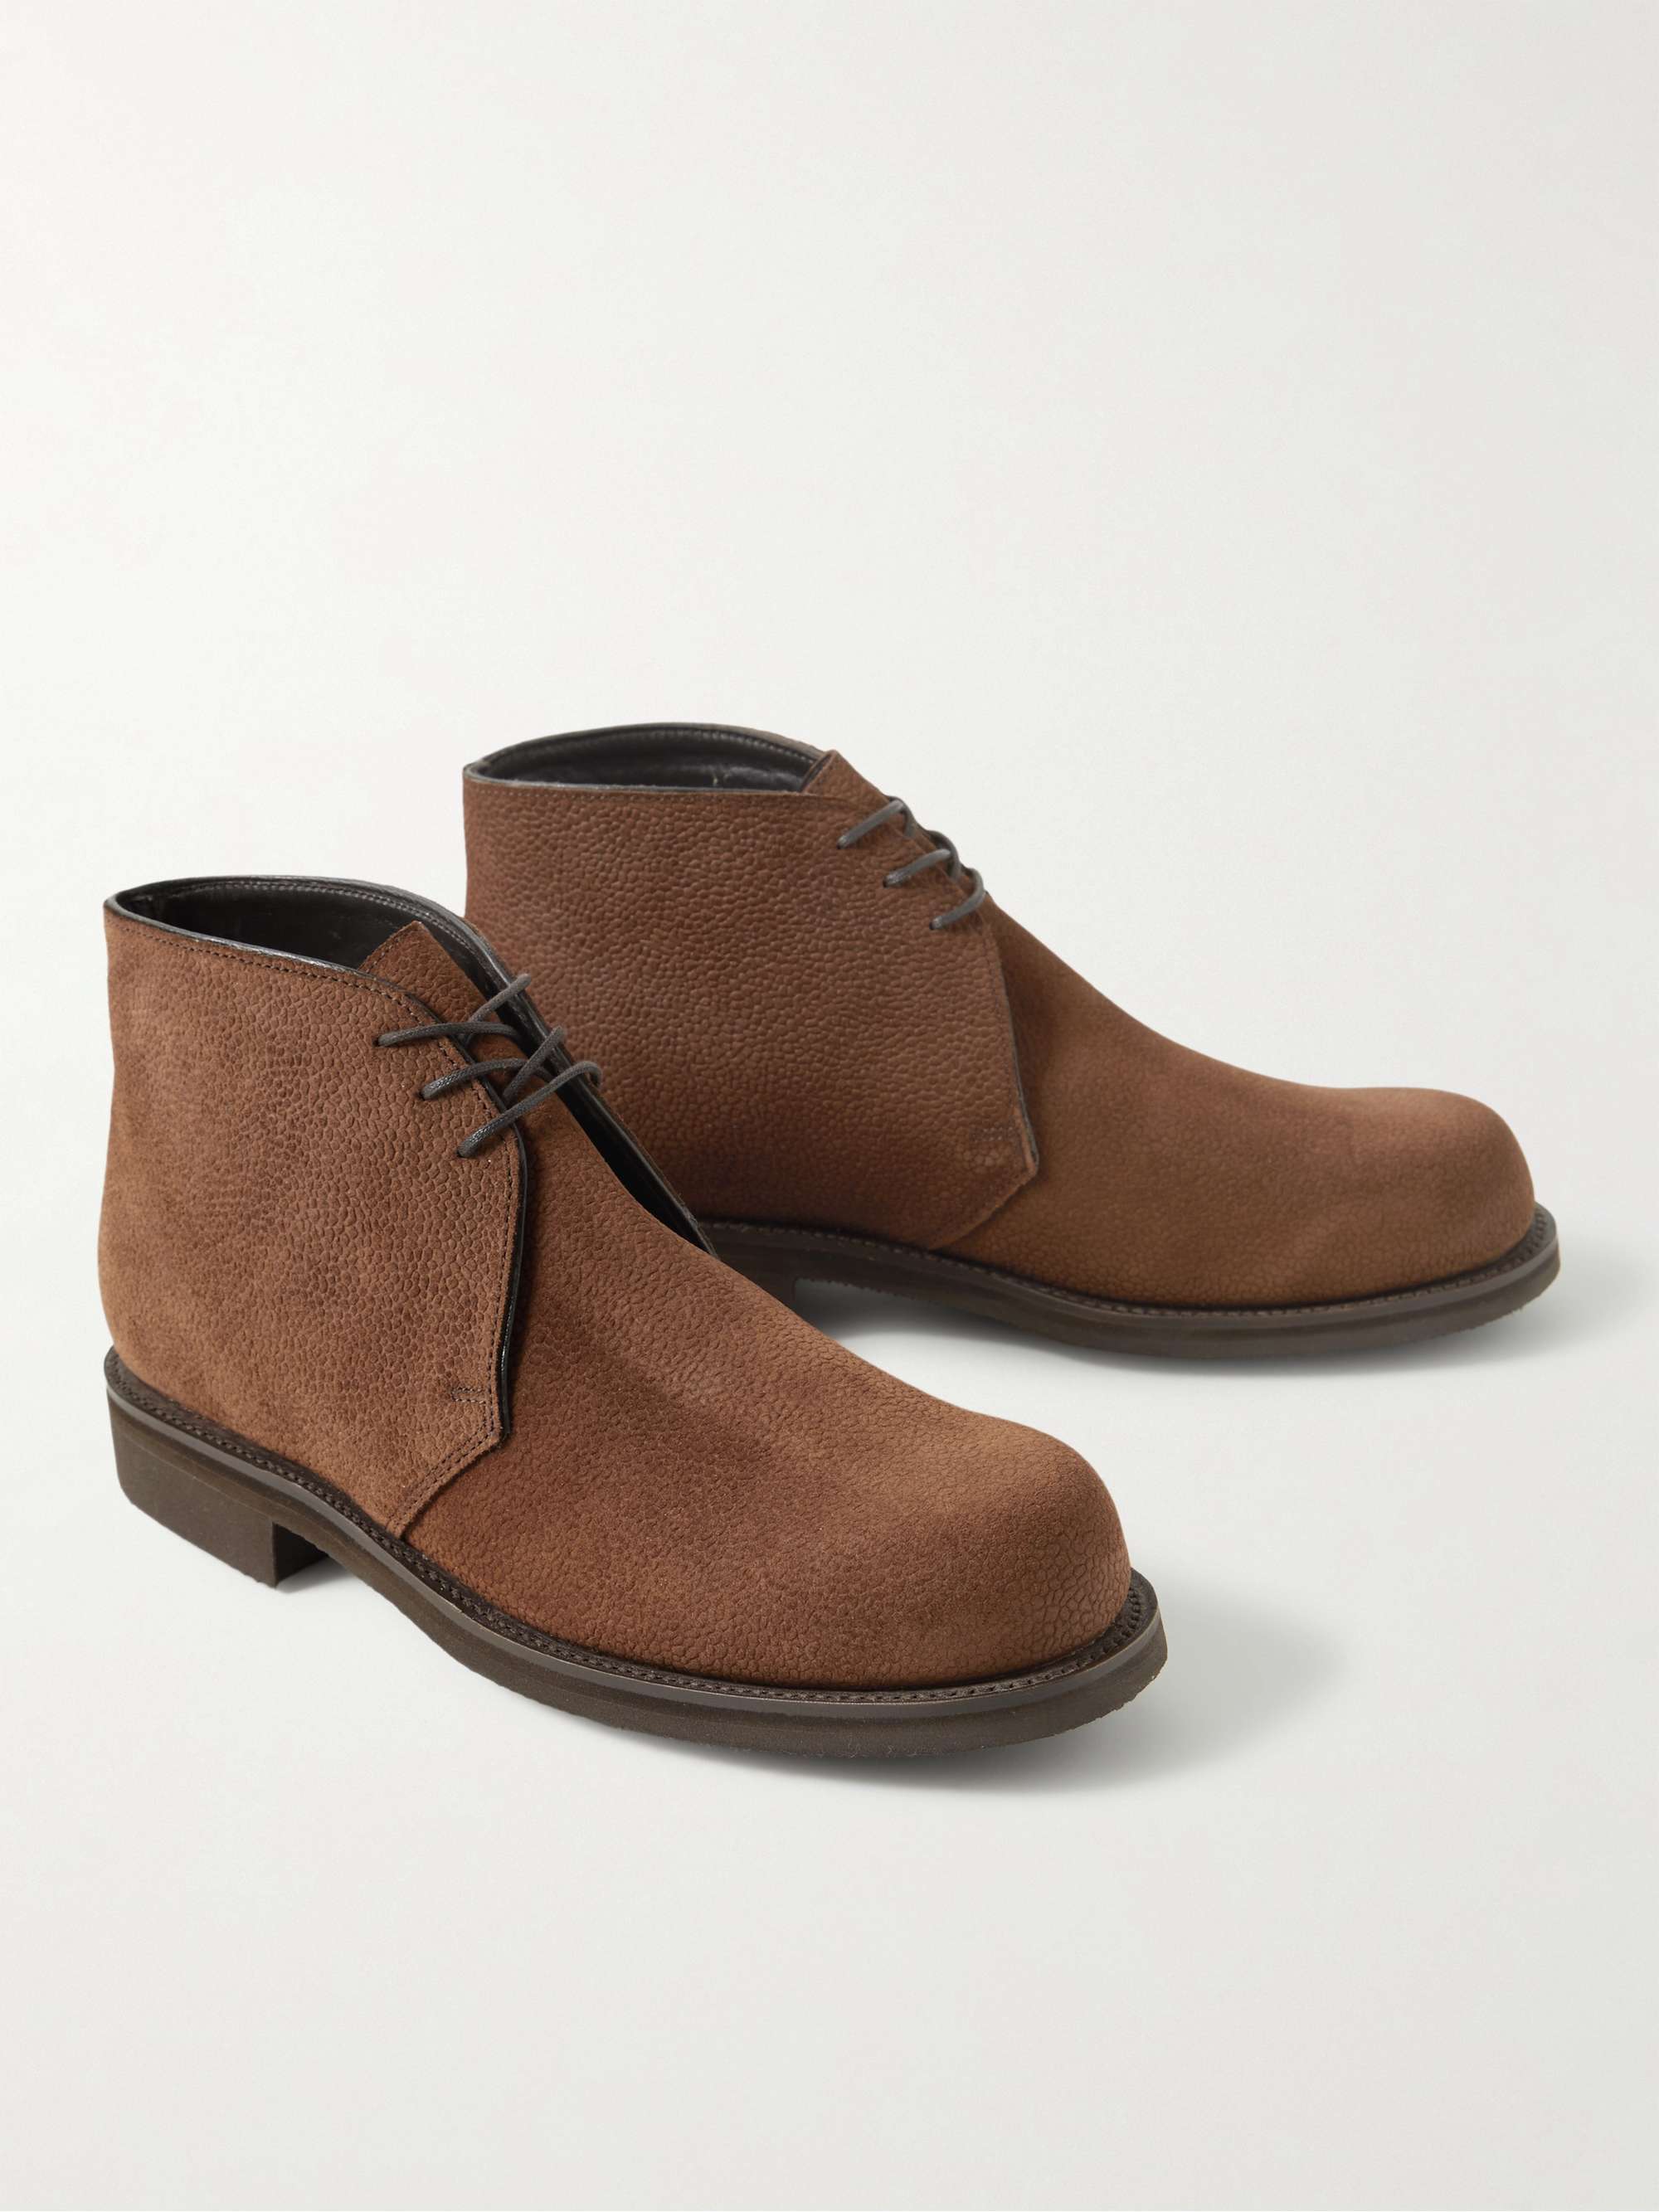 GEORGE CLEVERLEY Jacob Full-Grain Suede Chukka Boots for Men | MR PORTER